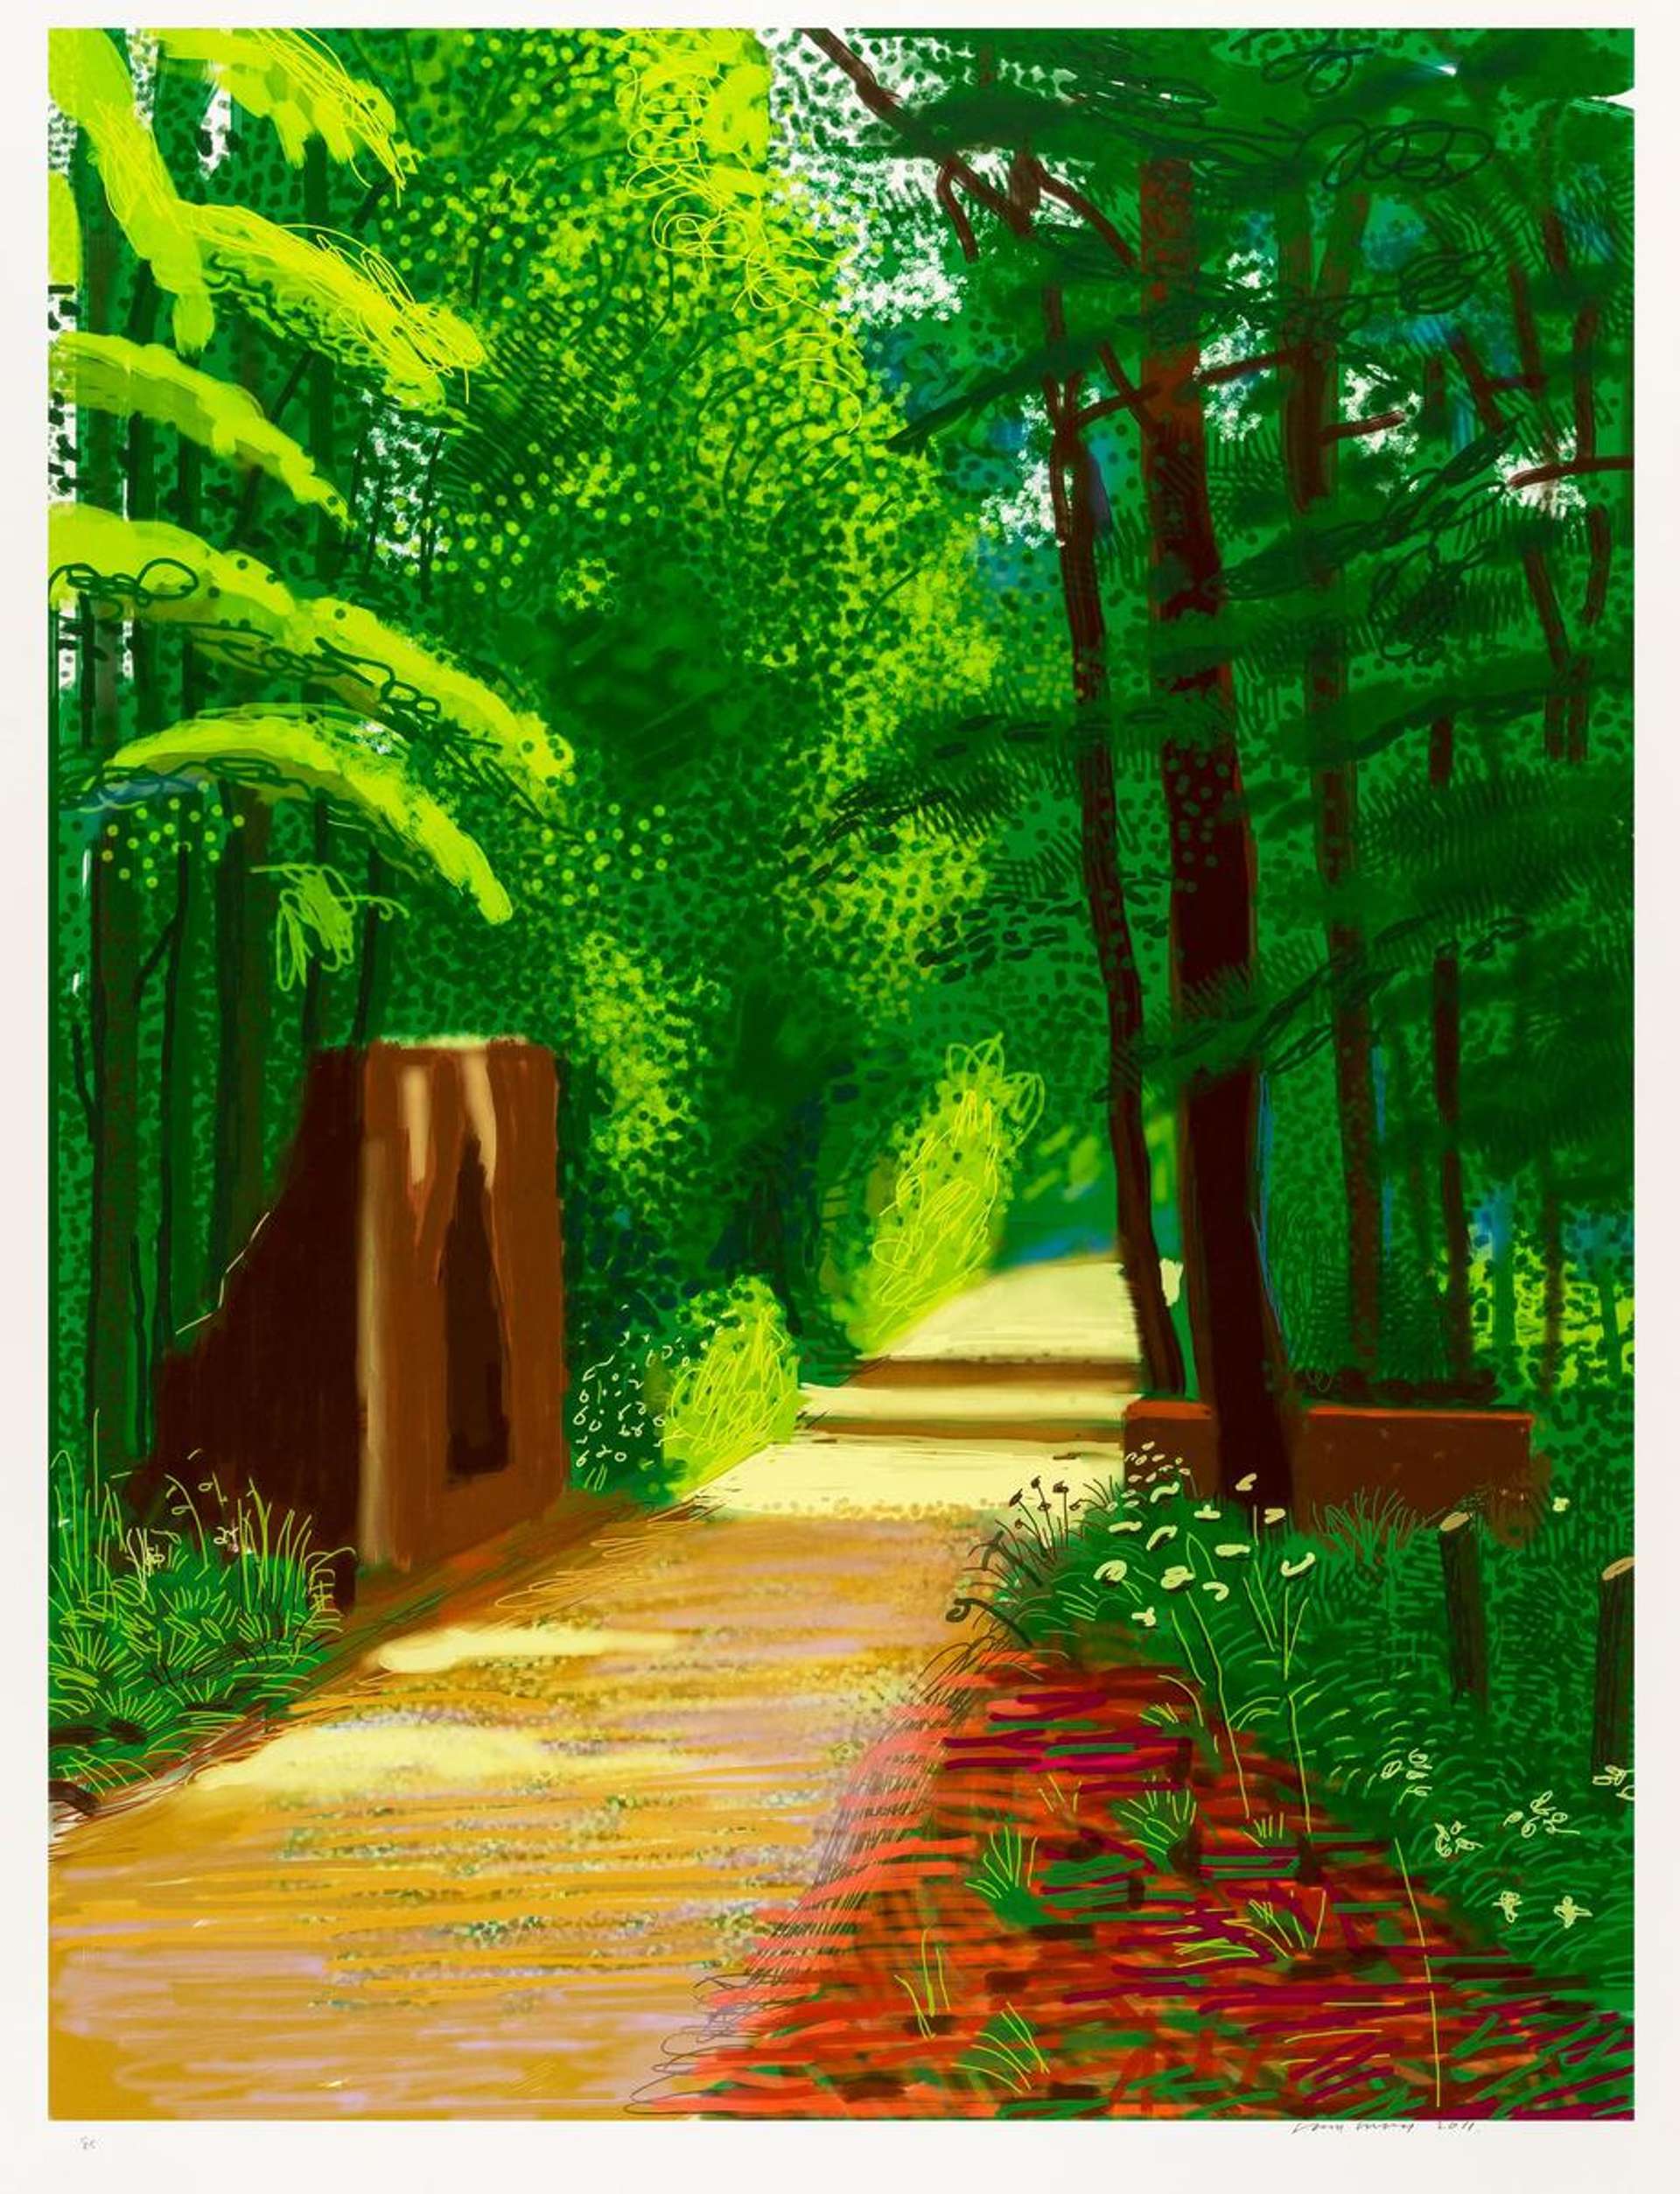 A digital print of a sunny path lined with bright green trees and red flowers.